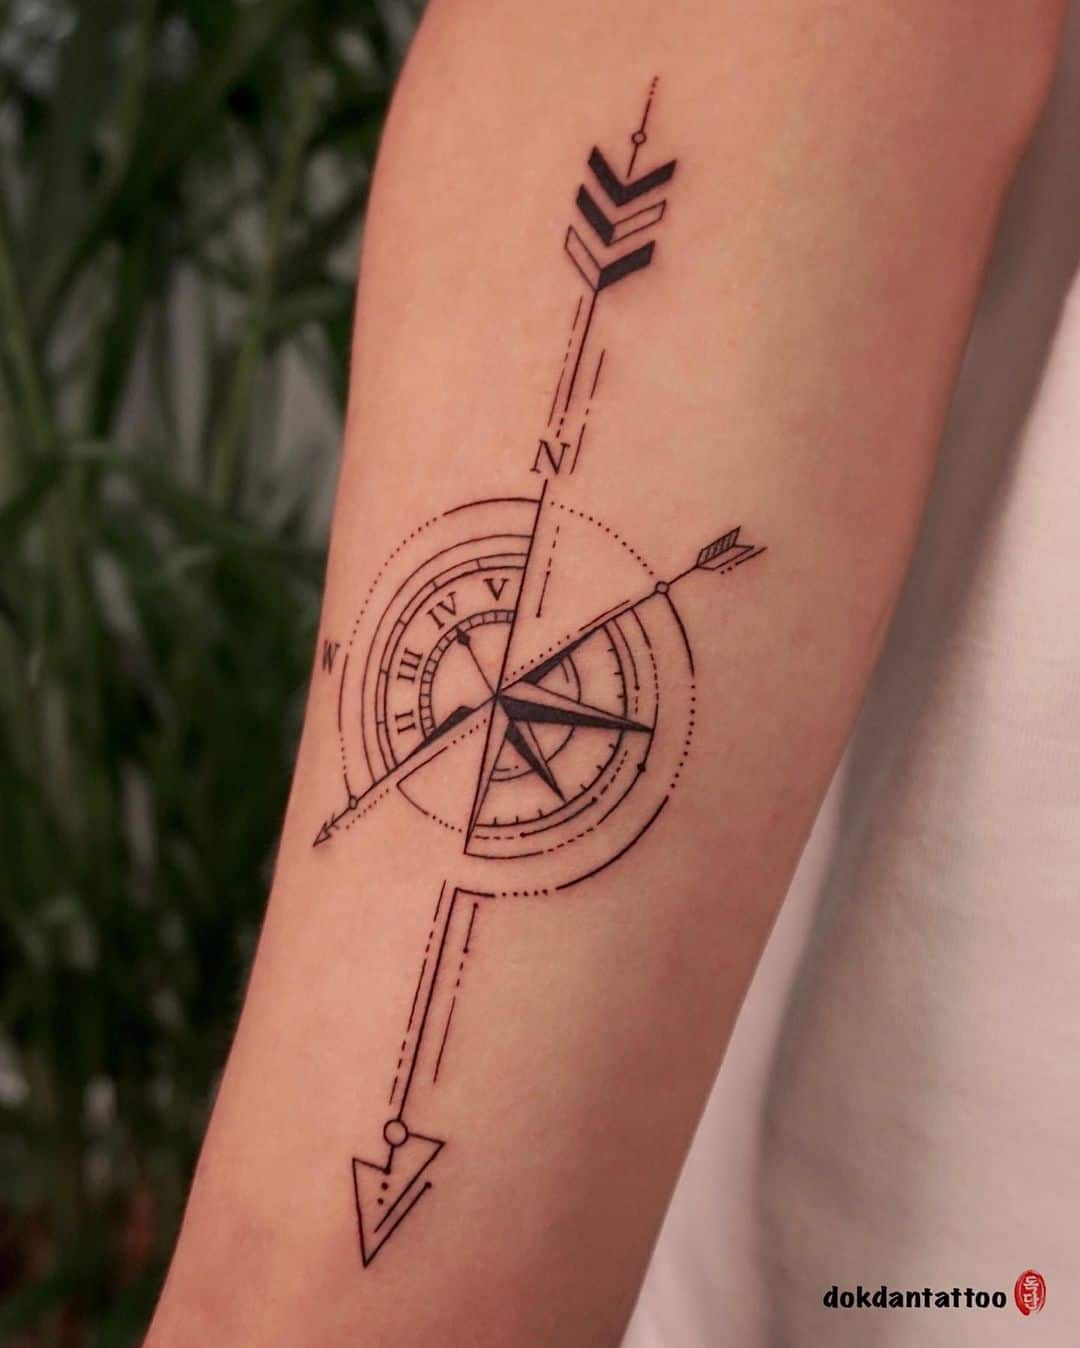 Squiggly Line Compass and Clock Tattoo